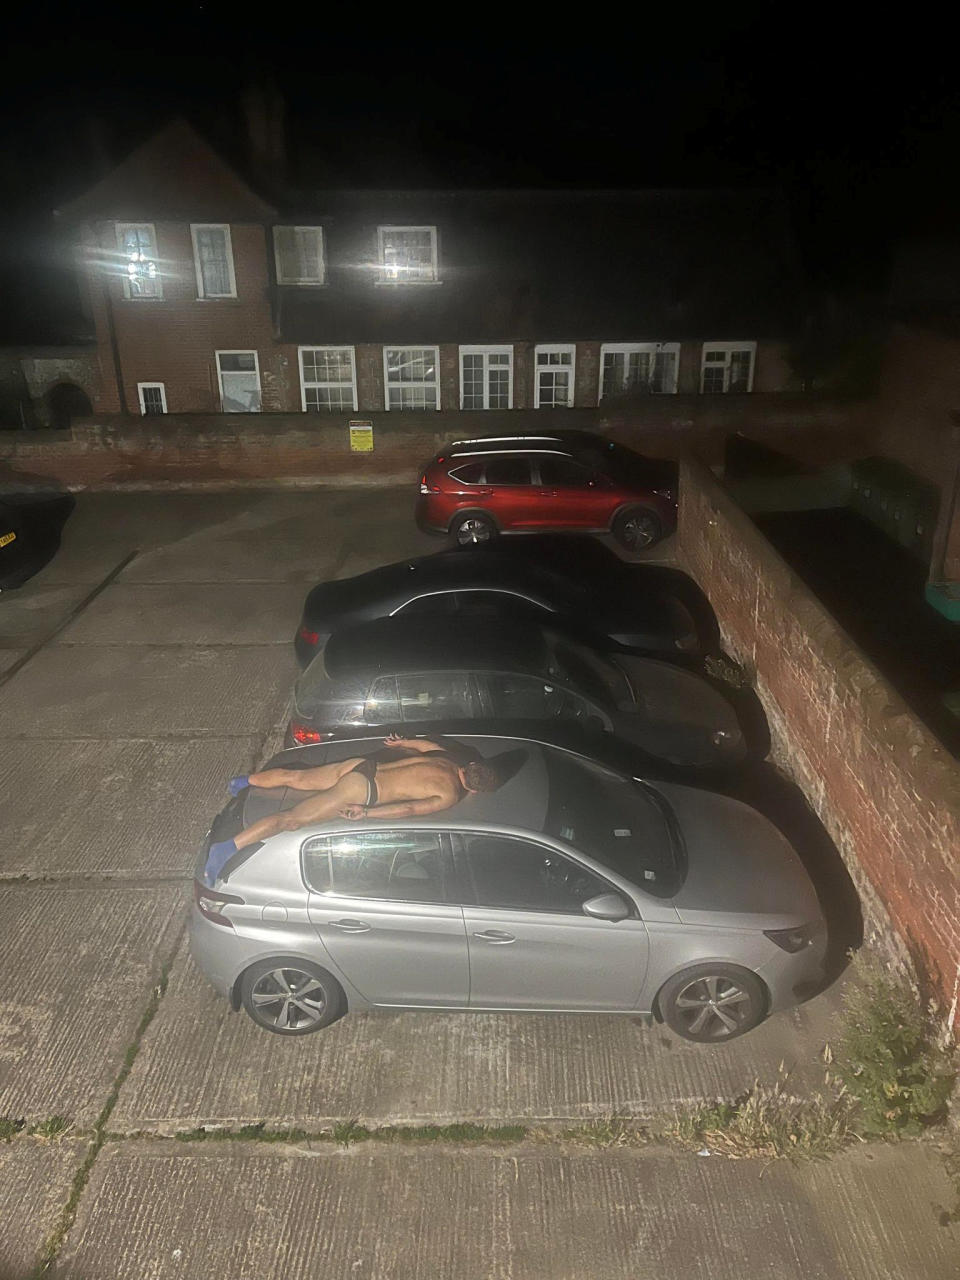 A resident was stunned to spot an apparently drunk man wearing just socks and pants asleep - on the top of a car. See SWNS story SWLNcar; Tom Selby heard a commotion in the night thought badgers had been creating the noise on Sunday (14/08) morning. mBut when he checked his CCTV he saw a man wearing only his socks and pants fast asleep on top of his car outside. Tom, of Cromer, Norfolk, described himself as a 